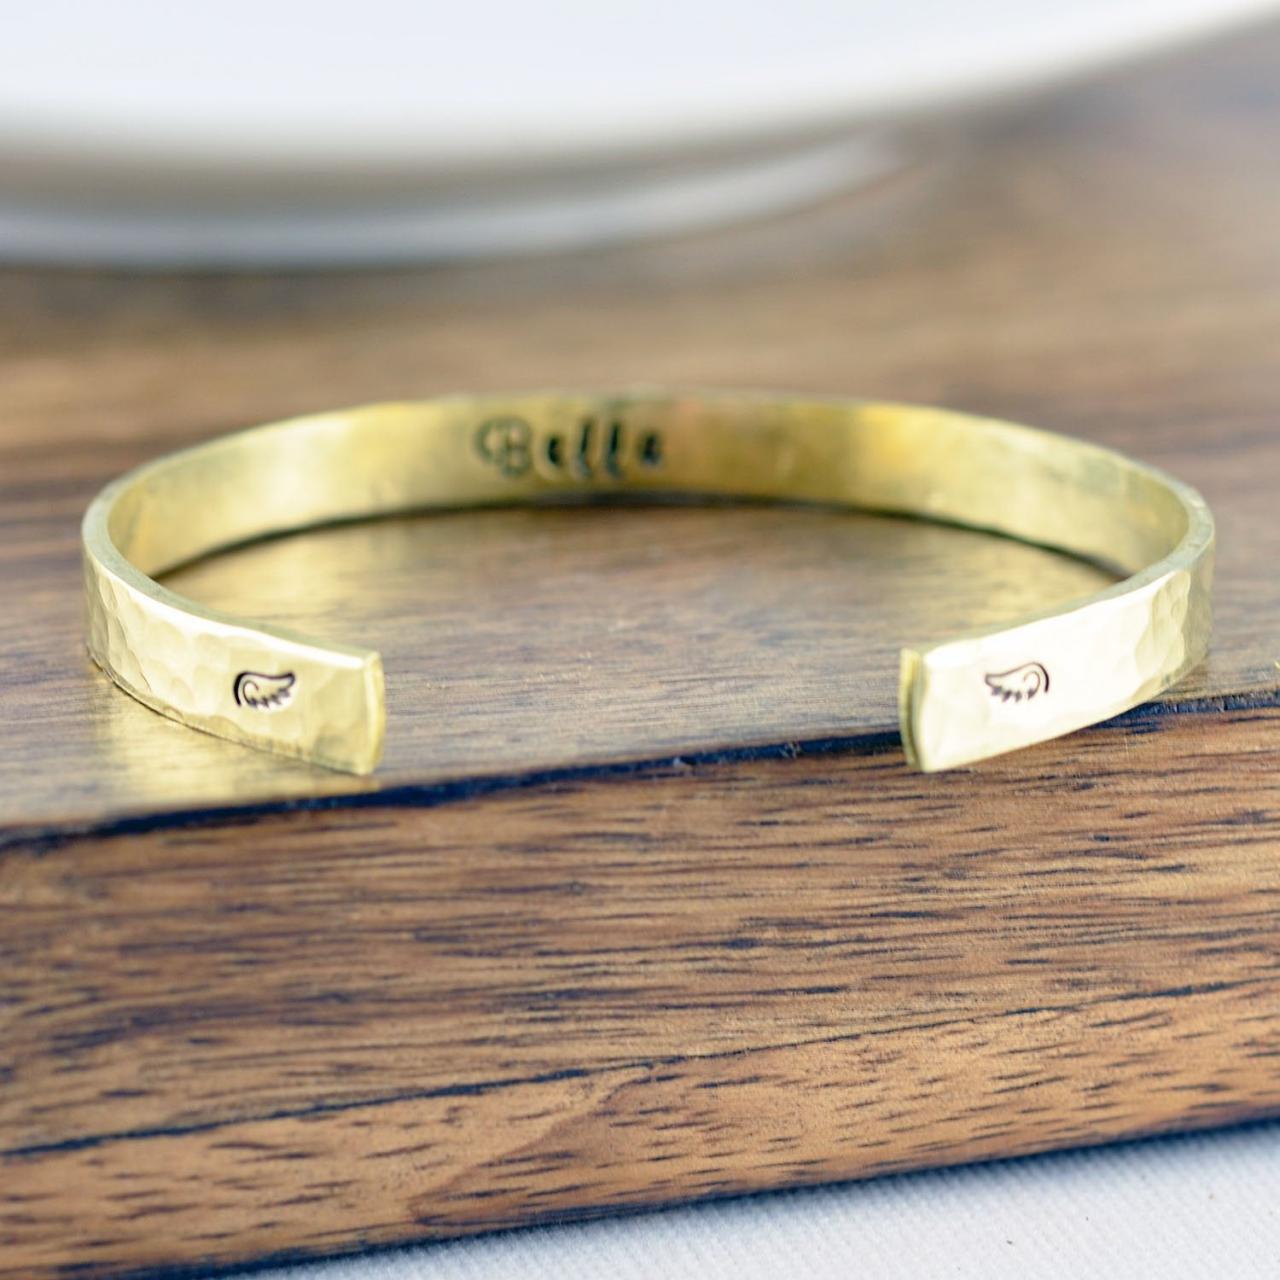 Gold Cuff Bracelet, Memorial Bracelet, Remembrance Gifts, Baby Loss Gift, Dog Loss Gift, Sympathy Gift, Memorial Gift, Pet Memorial Bracelet